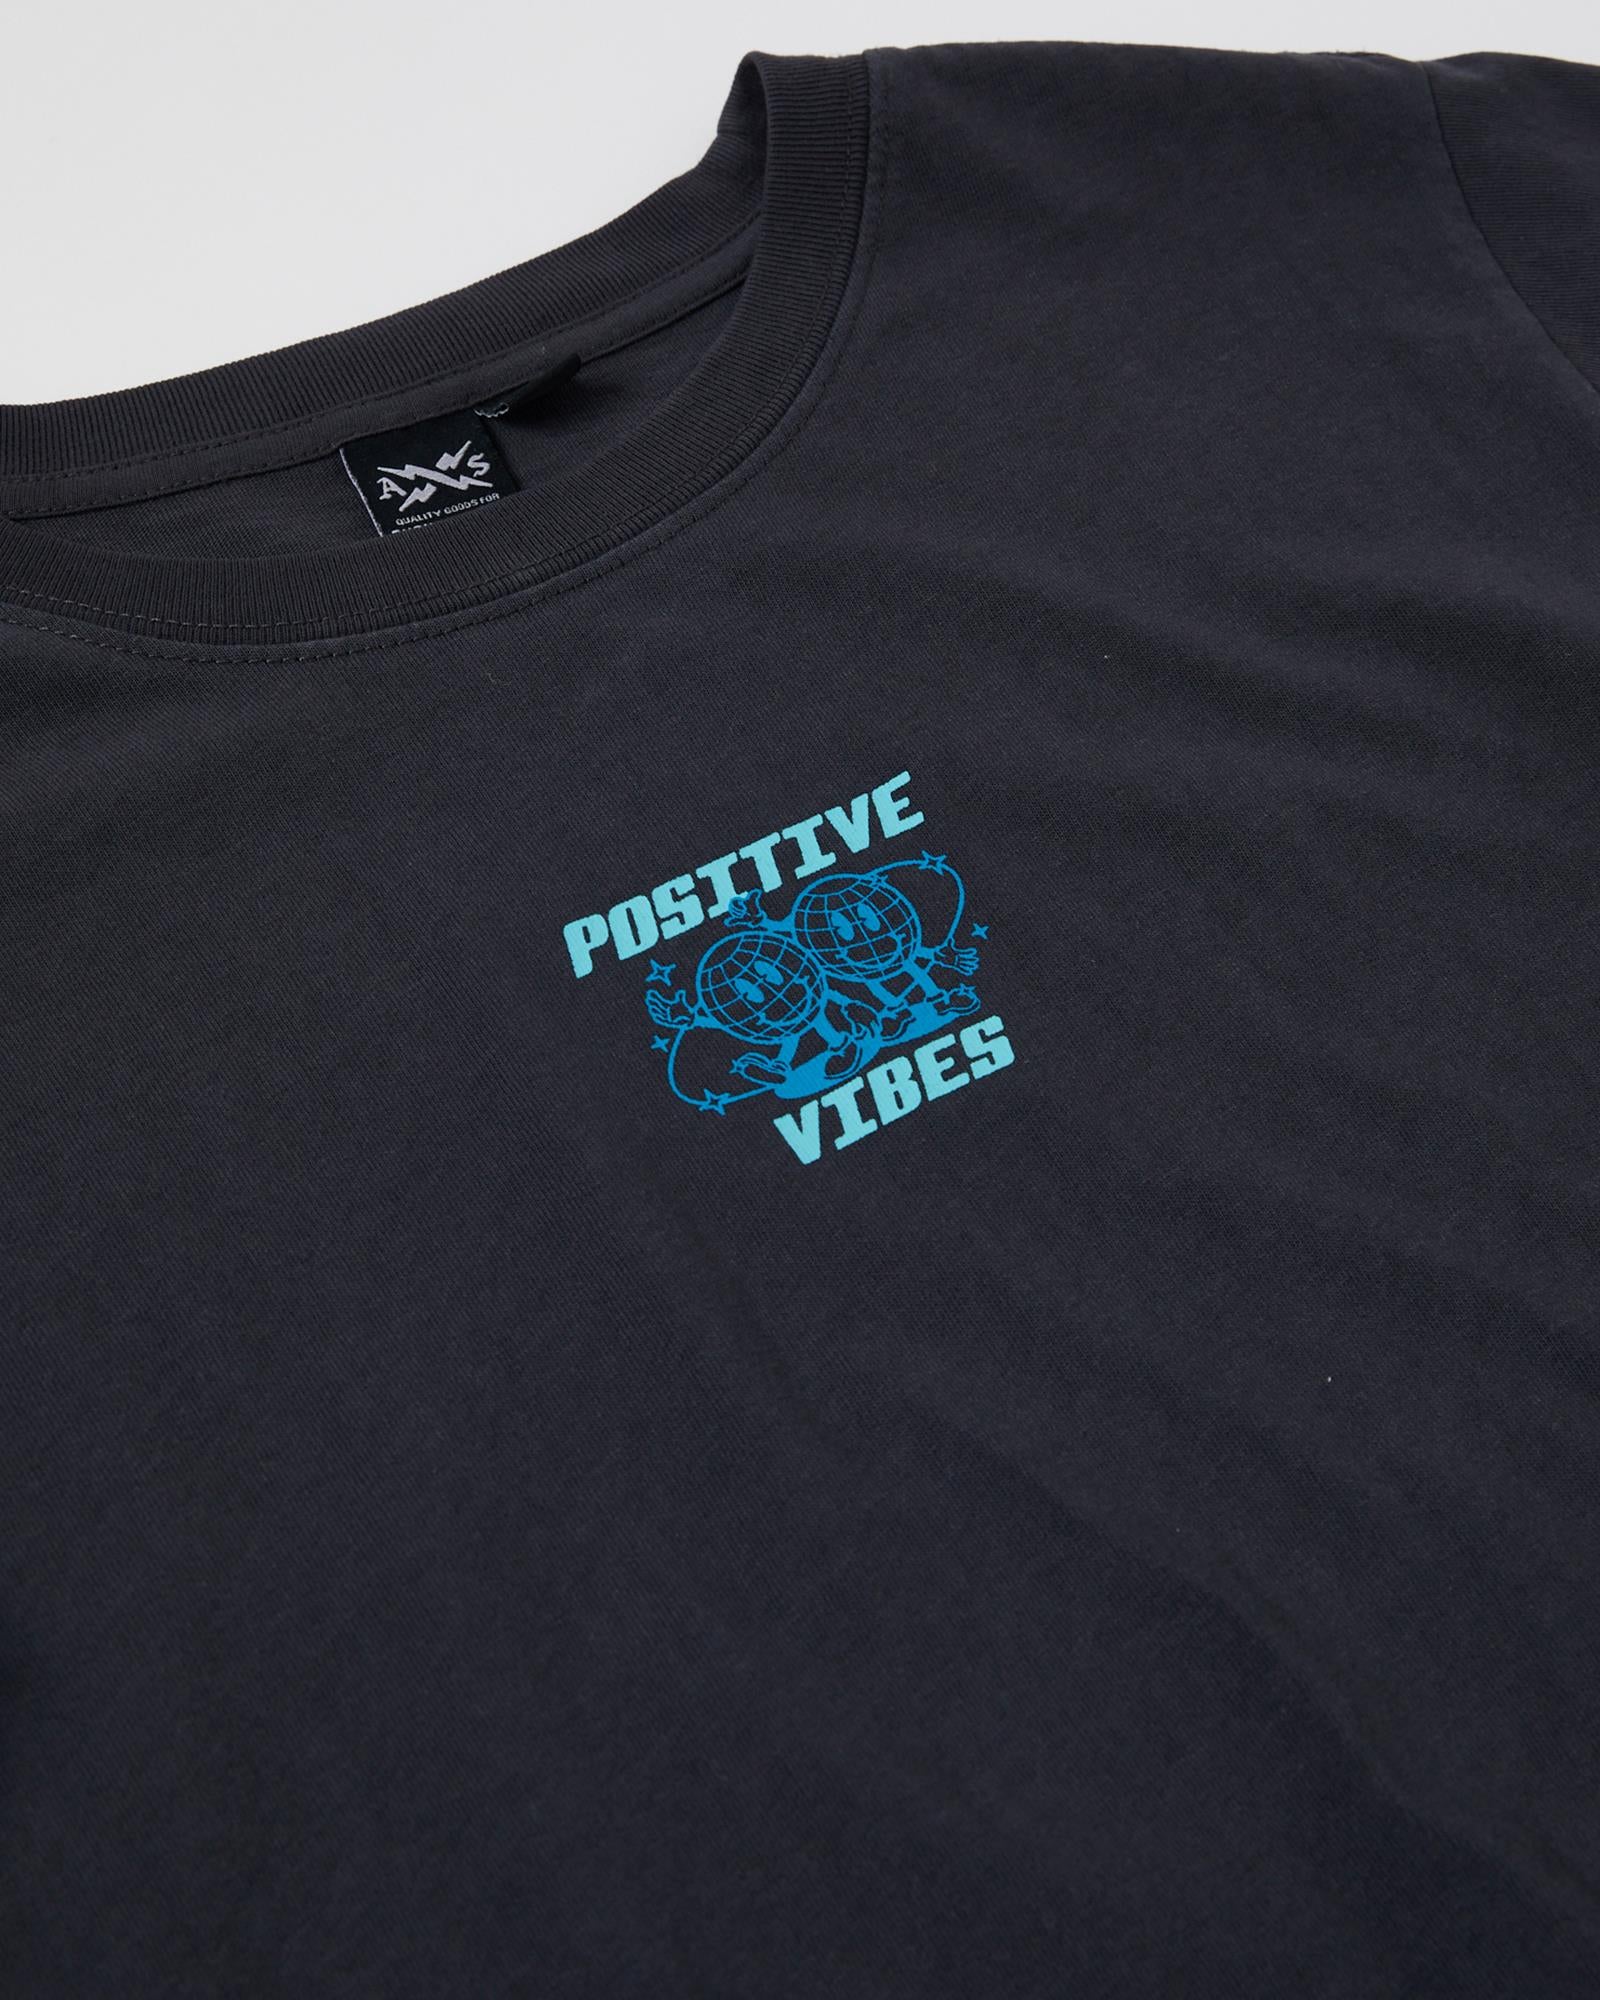 The Teen Boys Positive Vibes Tee from Alphabet Soup is a comfy cotton shirt with a washed black look and playful prints. Equipped with a crew neck and straight hem.